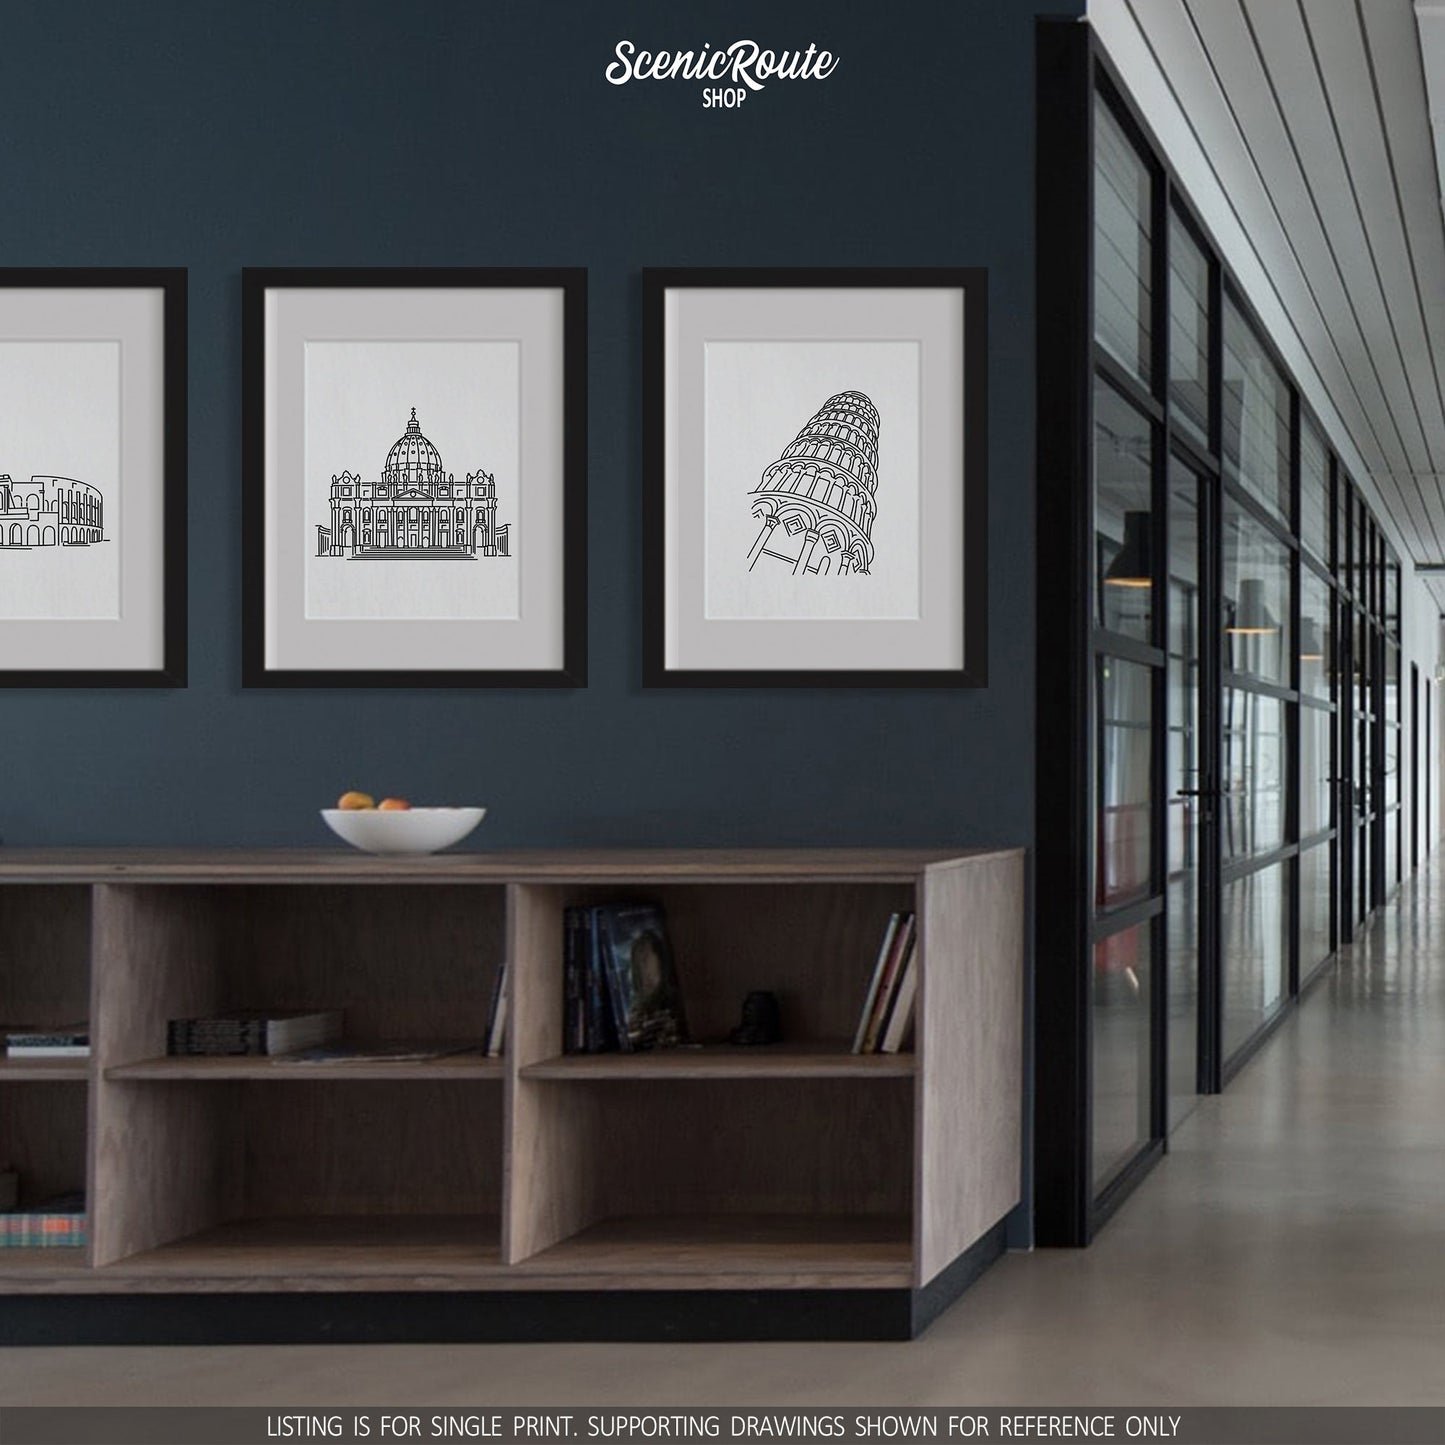 A group of three framed drawings hanging above a cabinet in a modern office. The line art drawings include the Colosseum, Saint Peters Basilica, and the Leaning Tower of Pisa